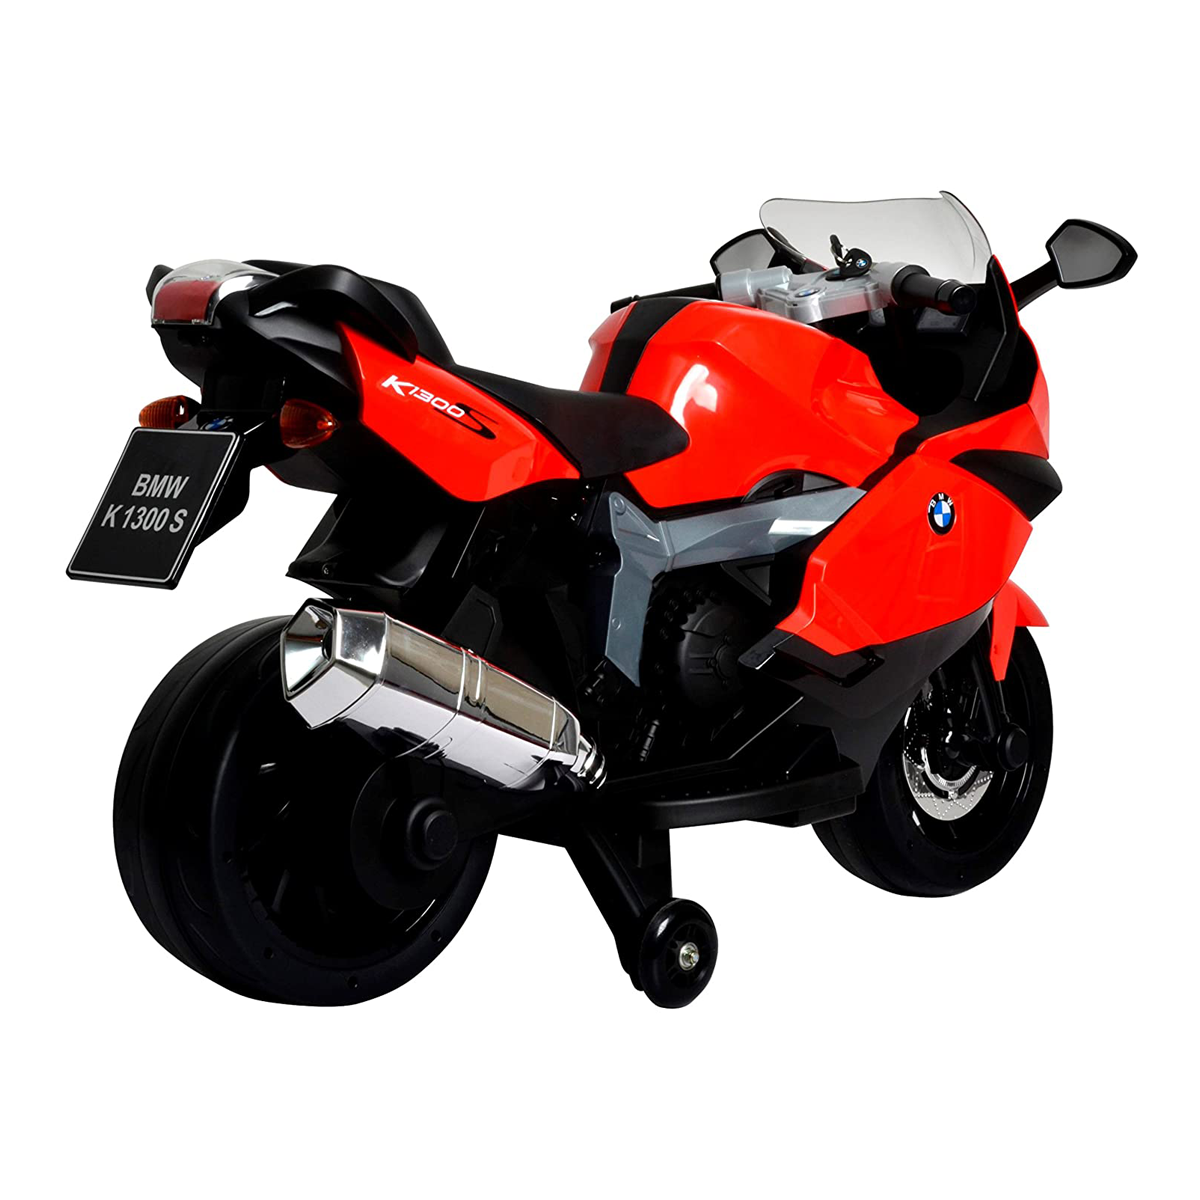 Officially licensed | kids bmw bike | model k1300s toy bike | Ride on | bmw toy motorcycle